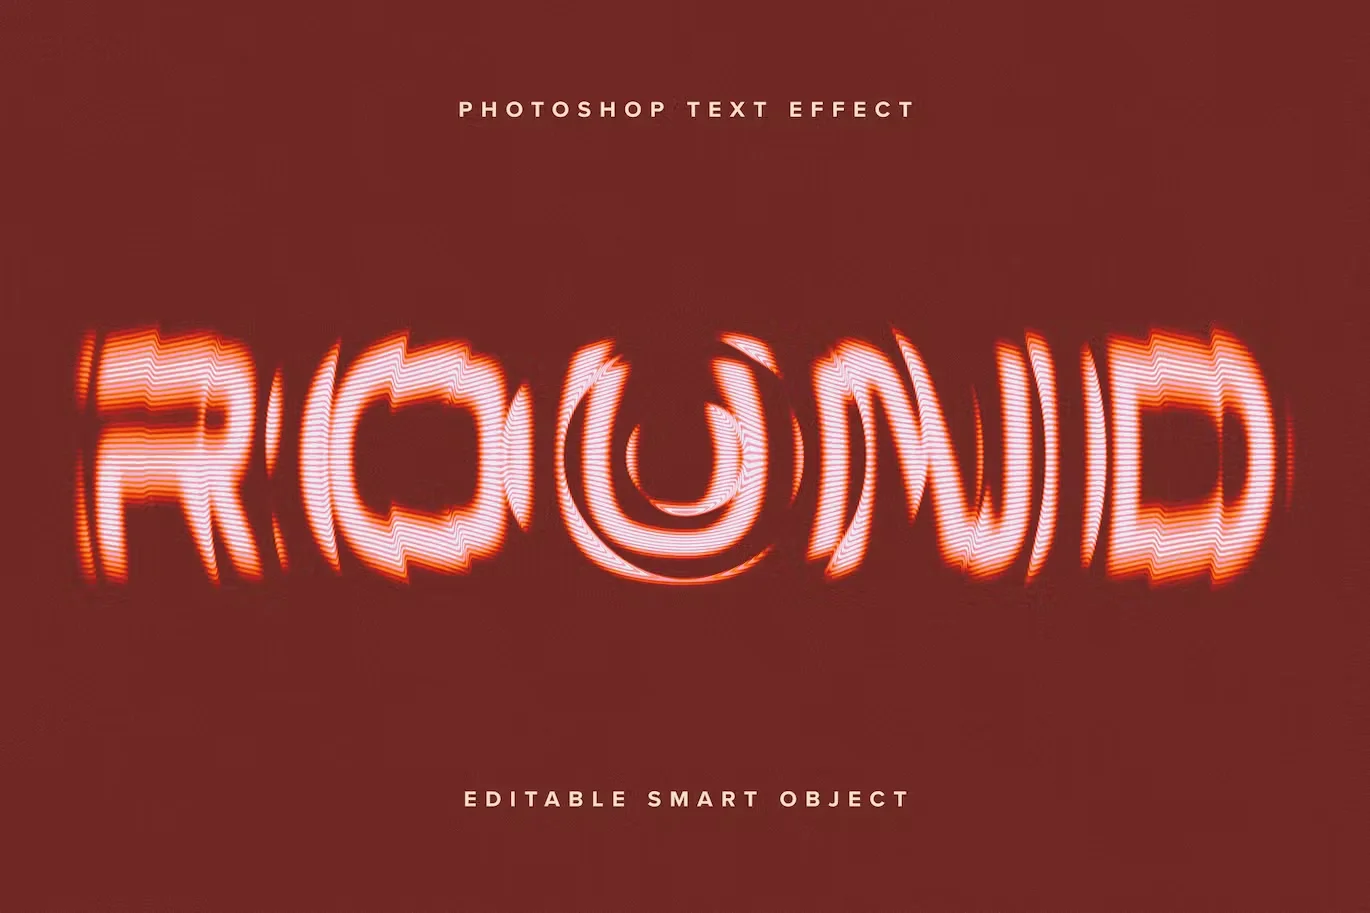 Round Glass Distorted Text Effect Mockup